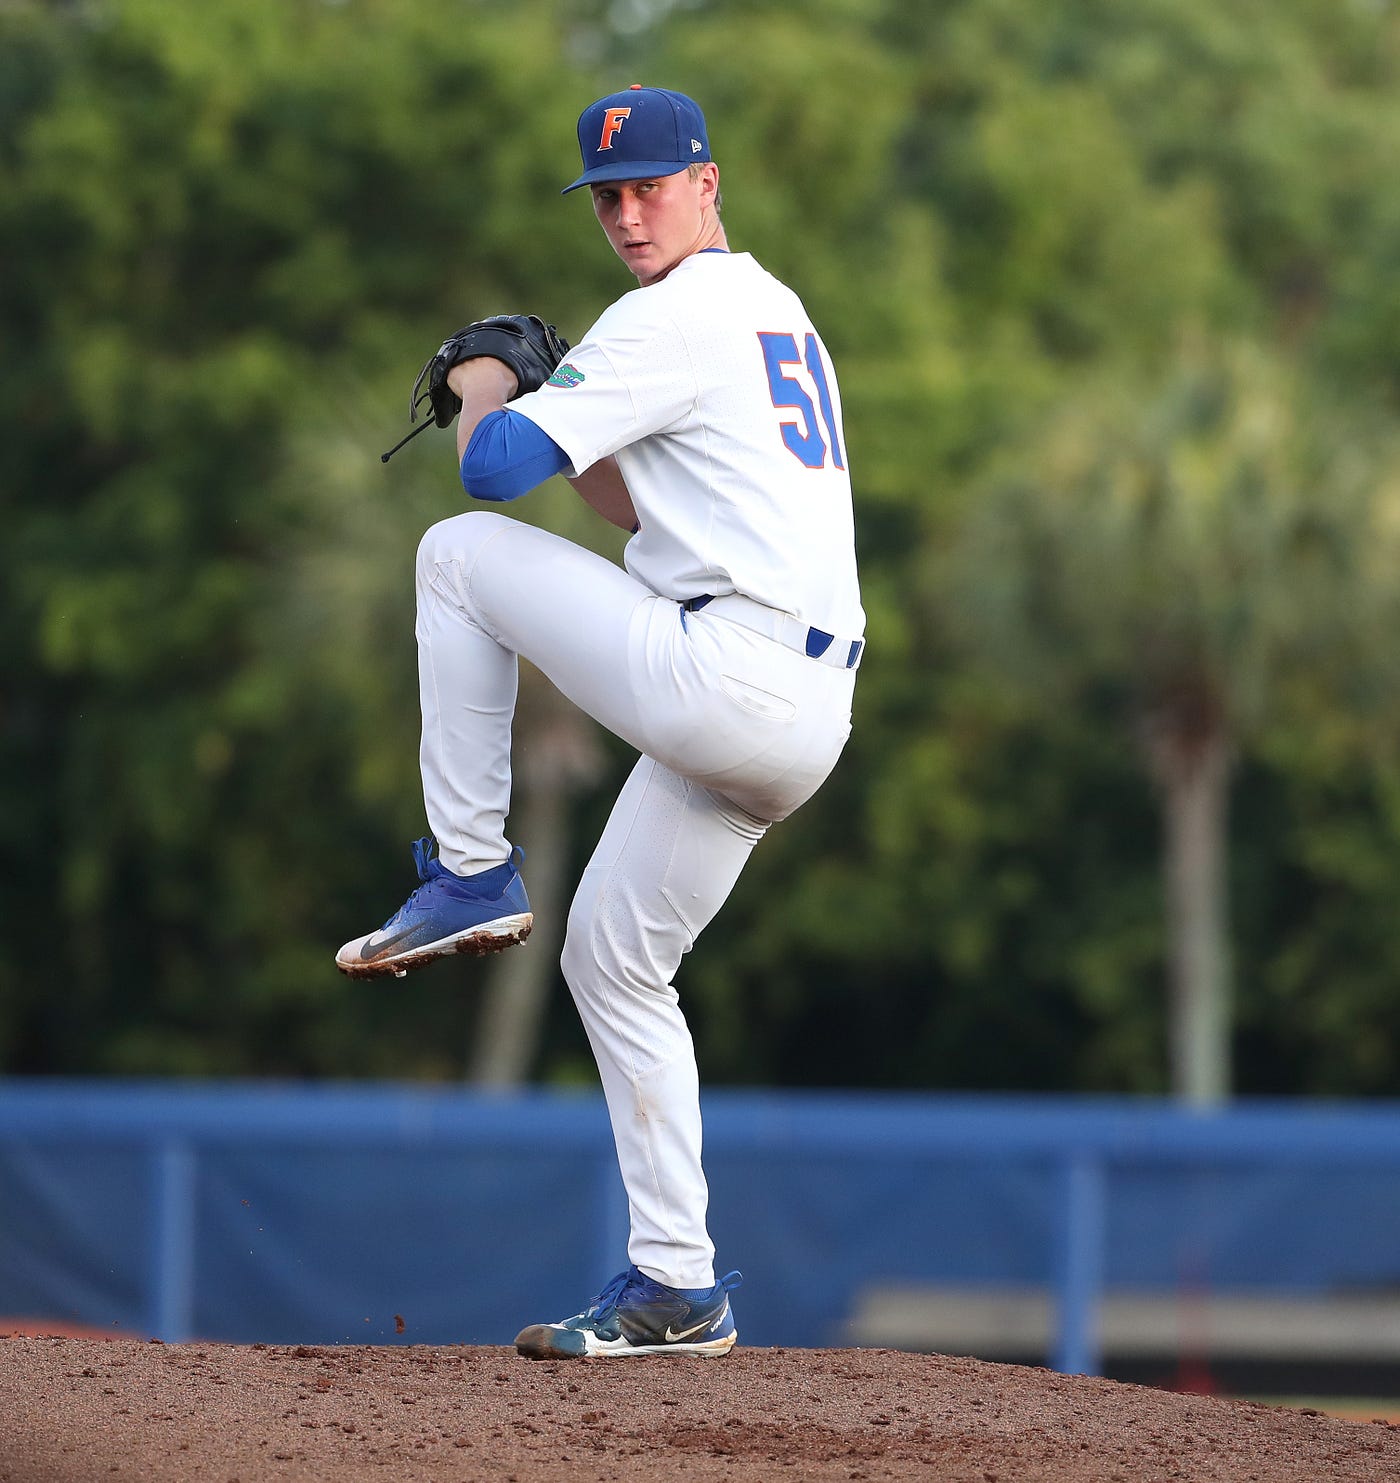 Royals Sign First-Round Pick Brady Singer, by Nick Kappel